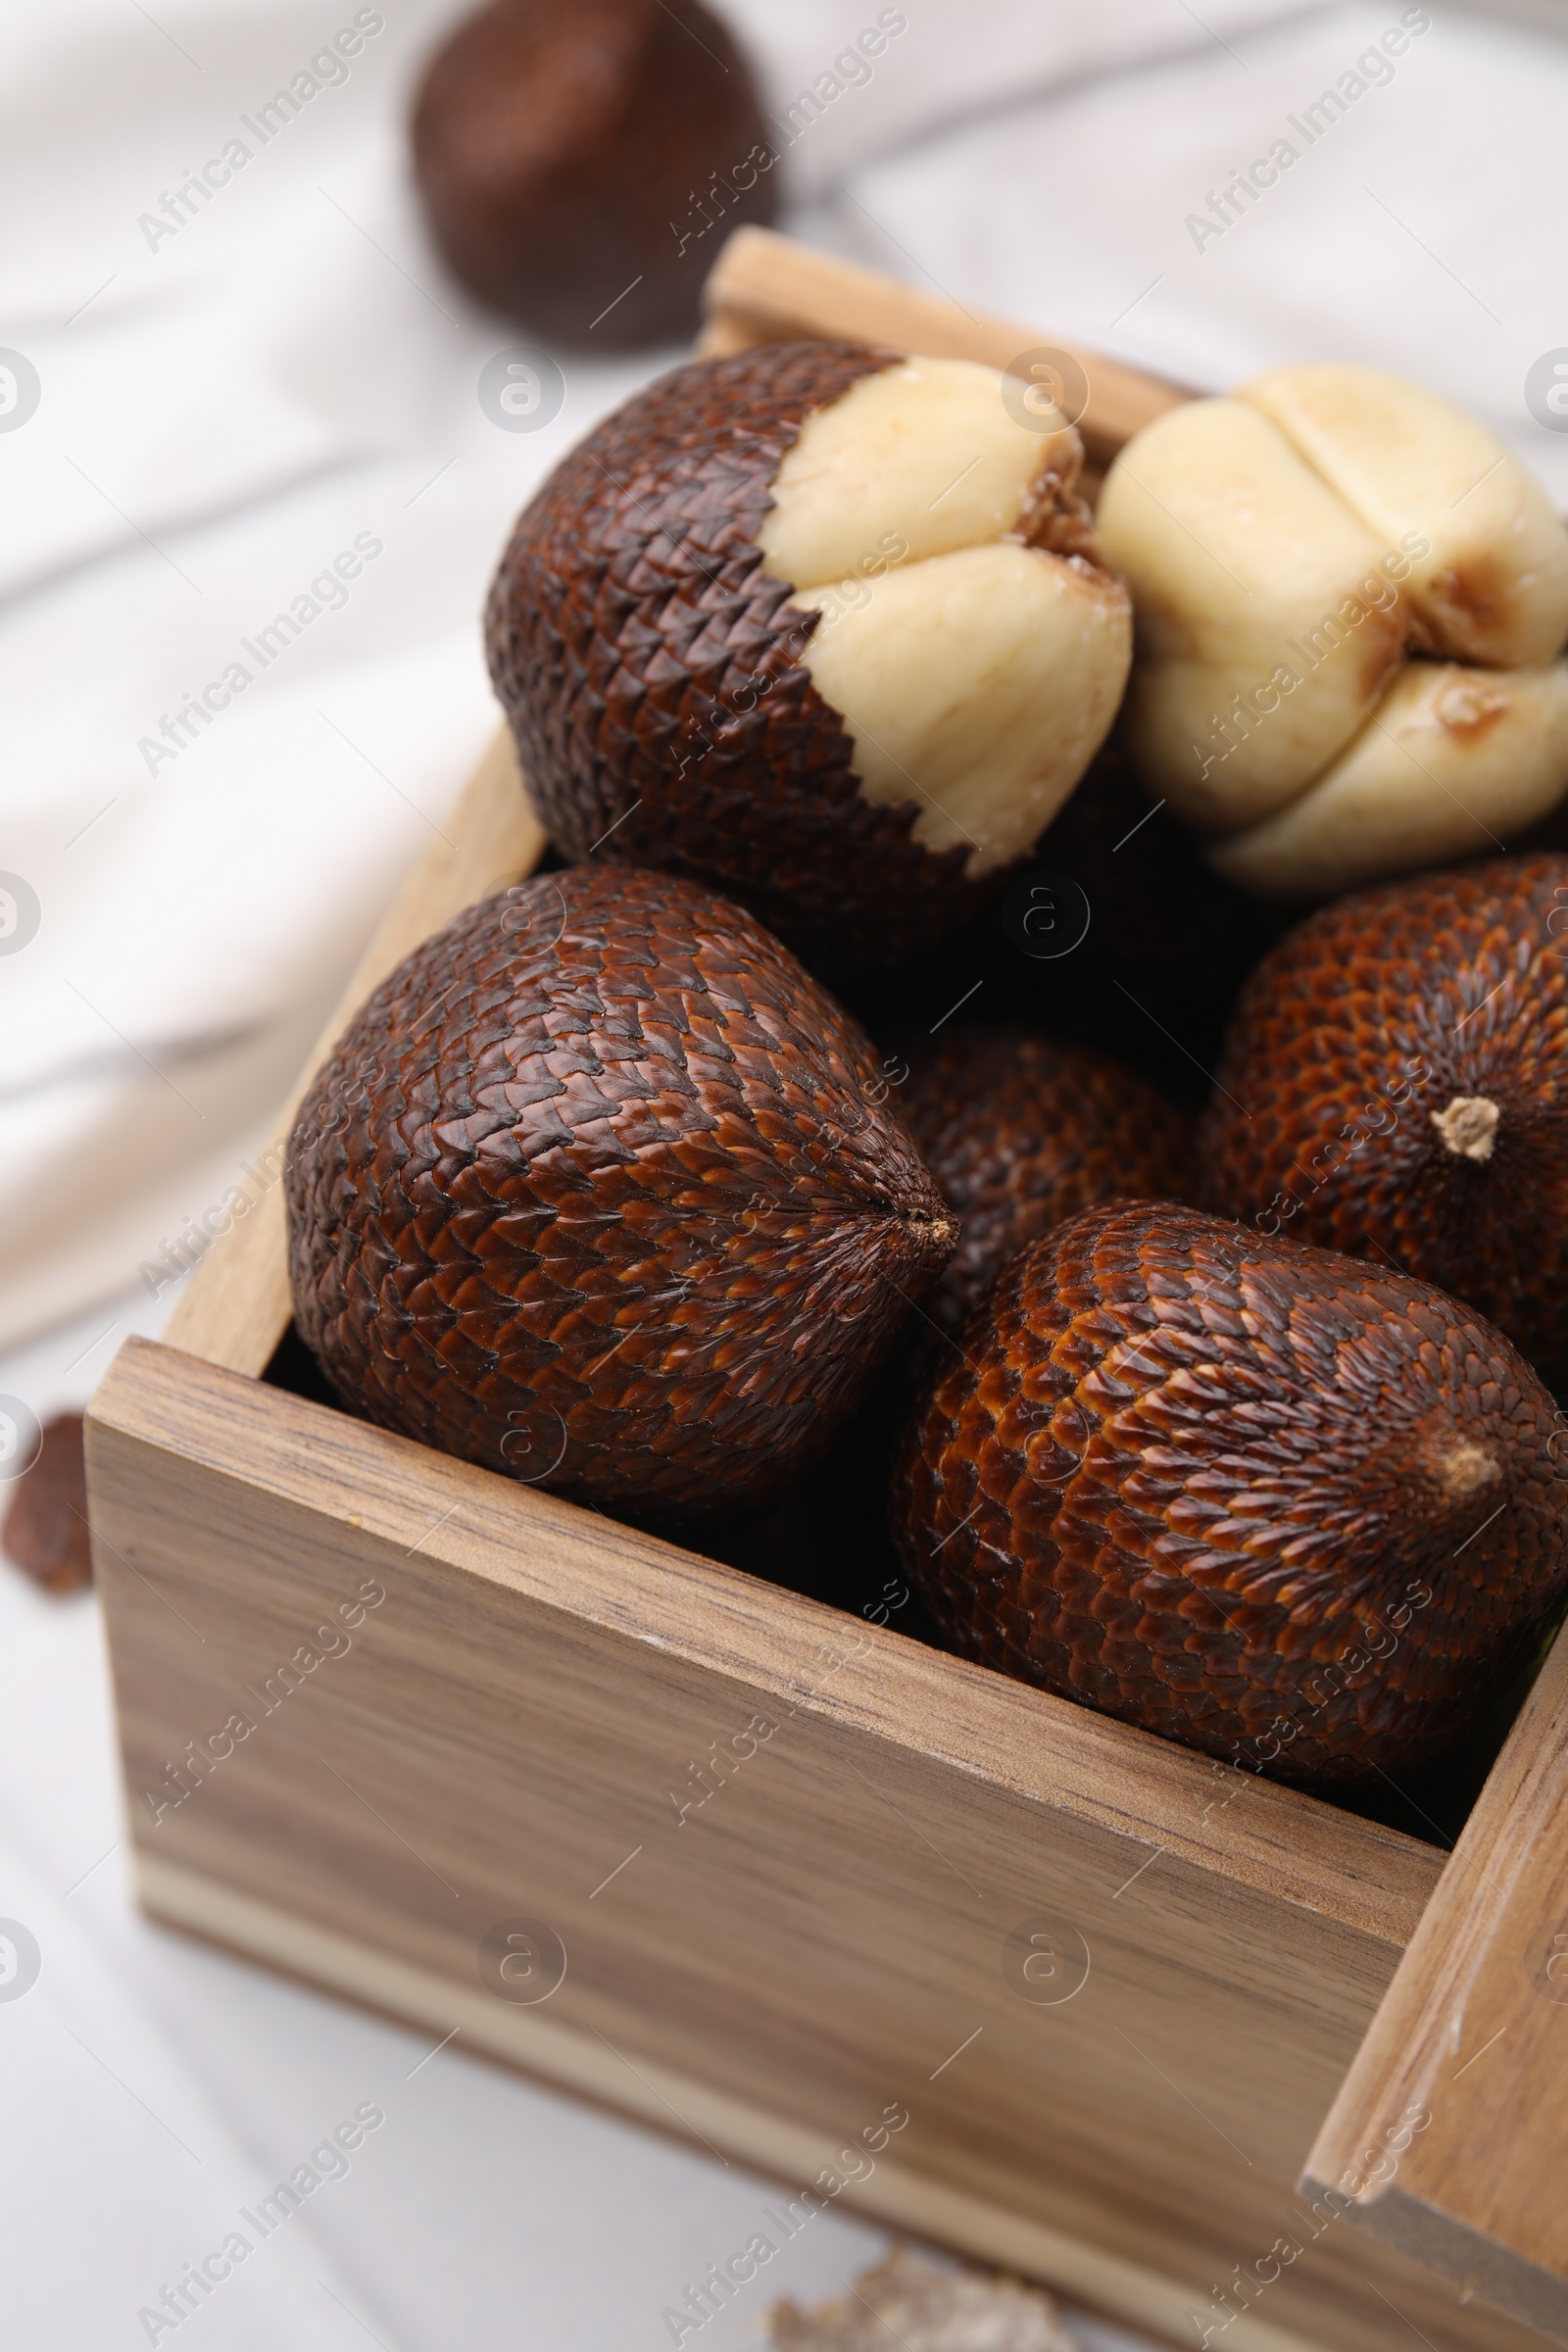 Photo of Wooden crate with fresh salak fruits on table, closeup